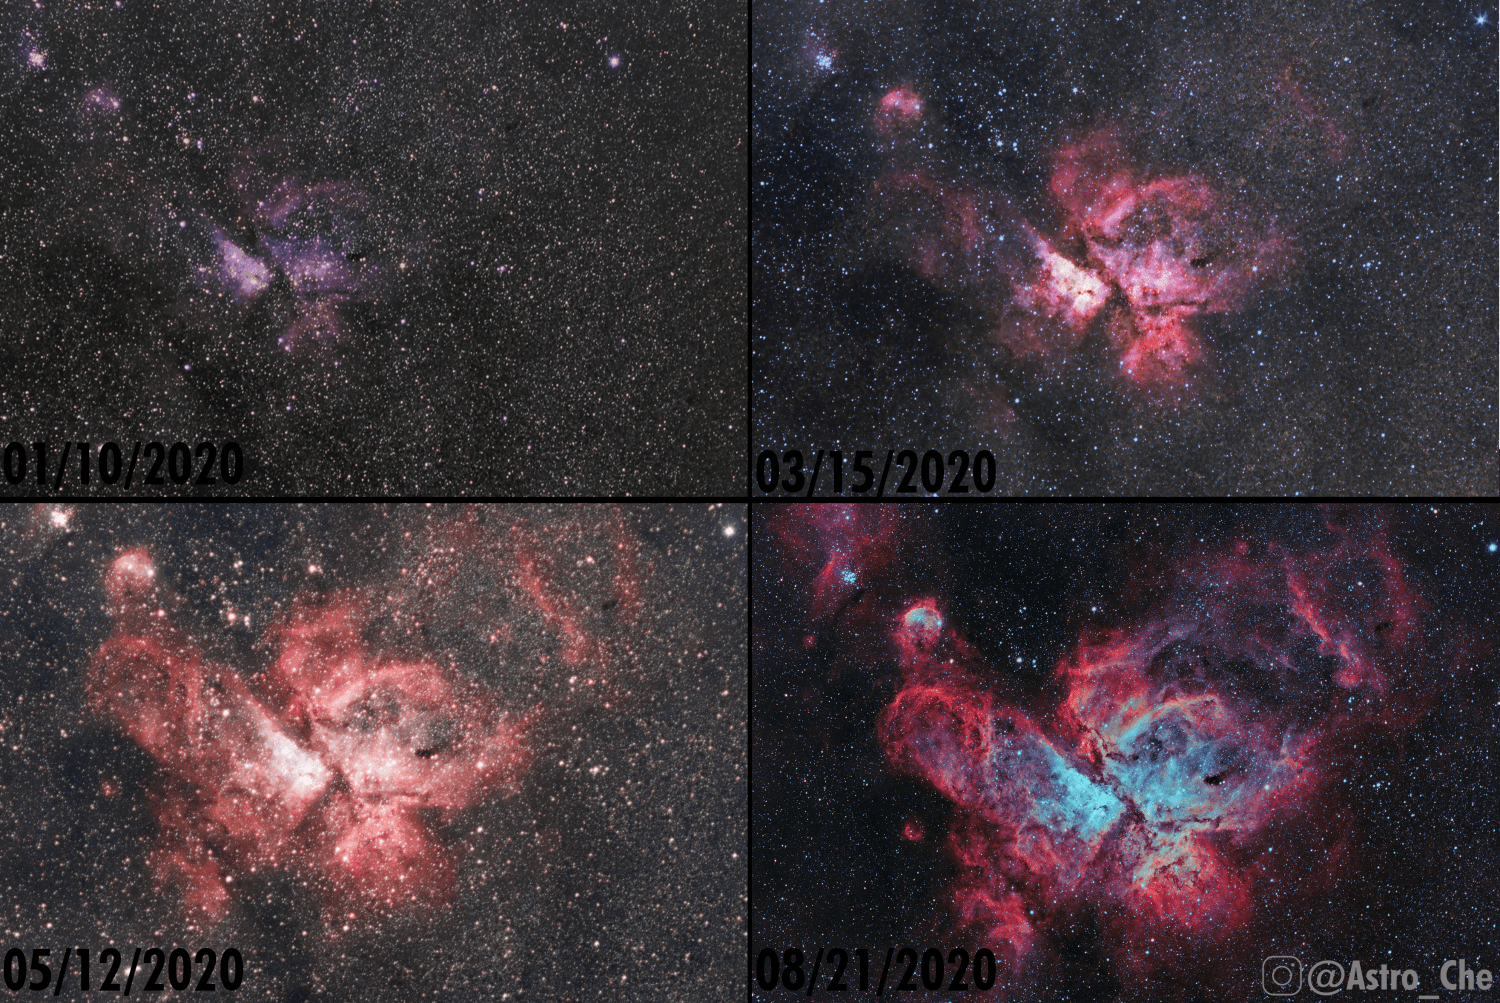 I started Astrophotography 8 months ago, with an image of the Carina Nebula. It's the largest and brightness in the night sky. This is my progress photographing it throughout 2020